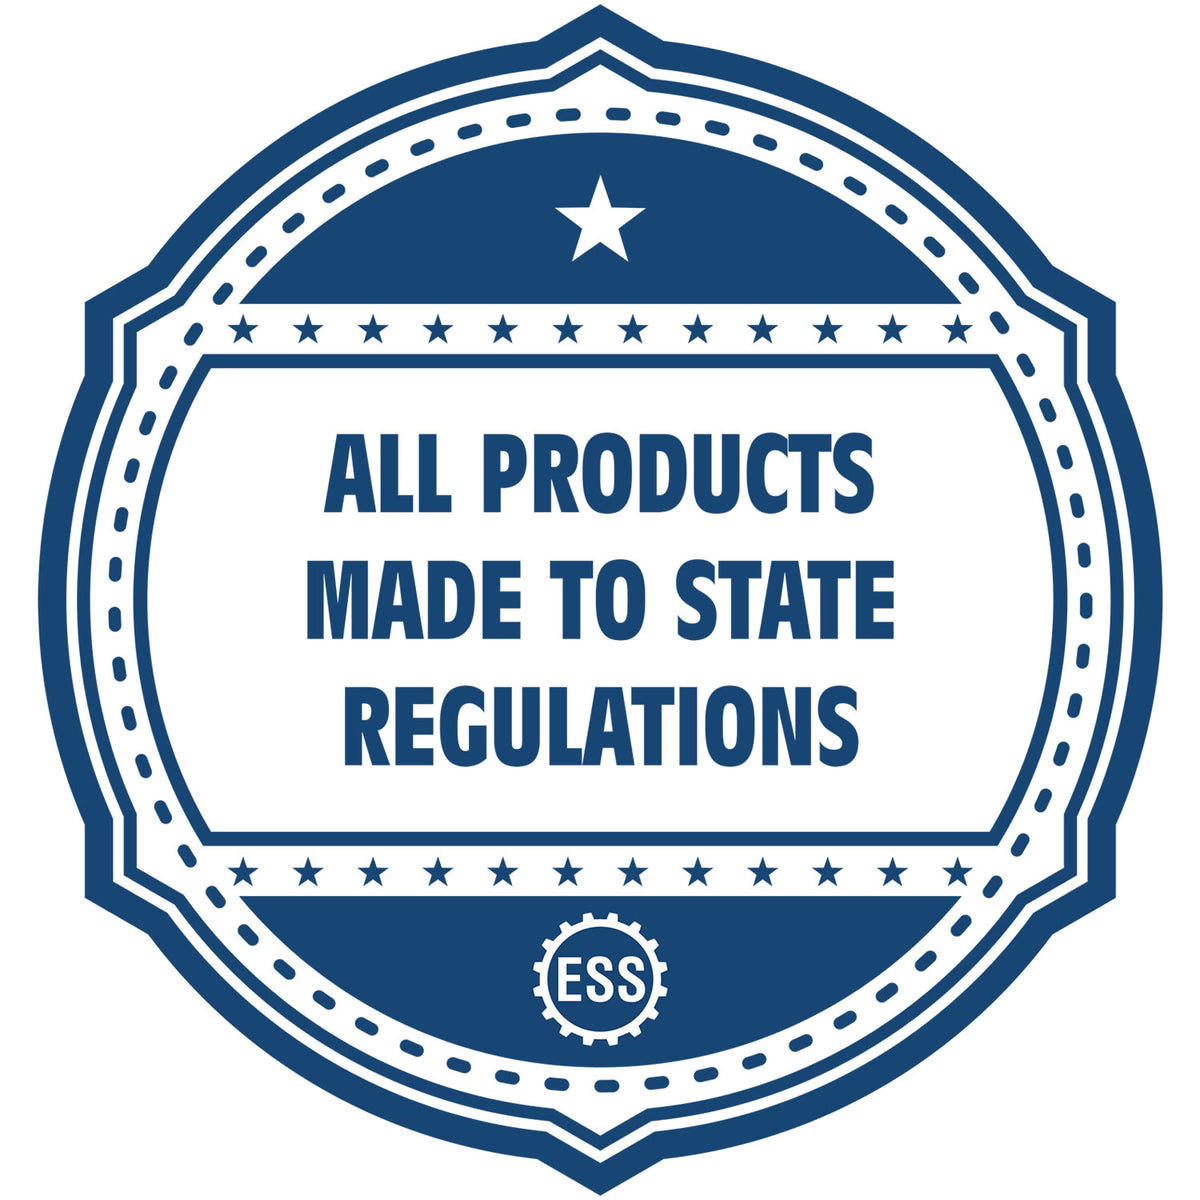 A blue icon or badge for the Tennessee Geologist Desk Seal showing that this product is made in compliance with state regulations.